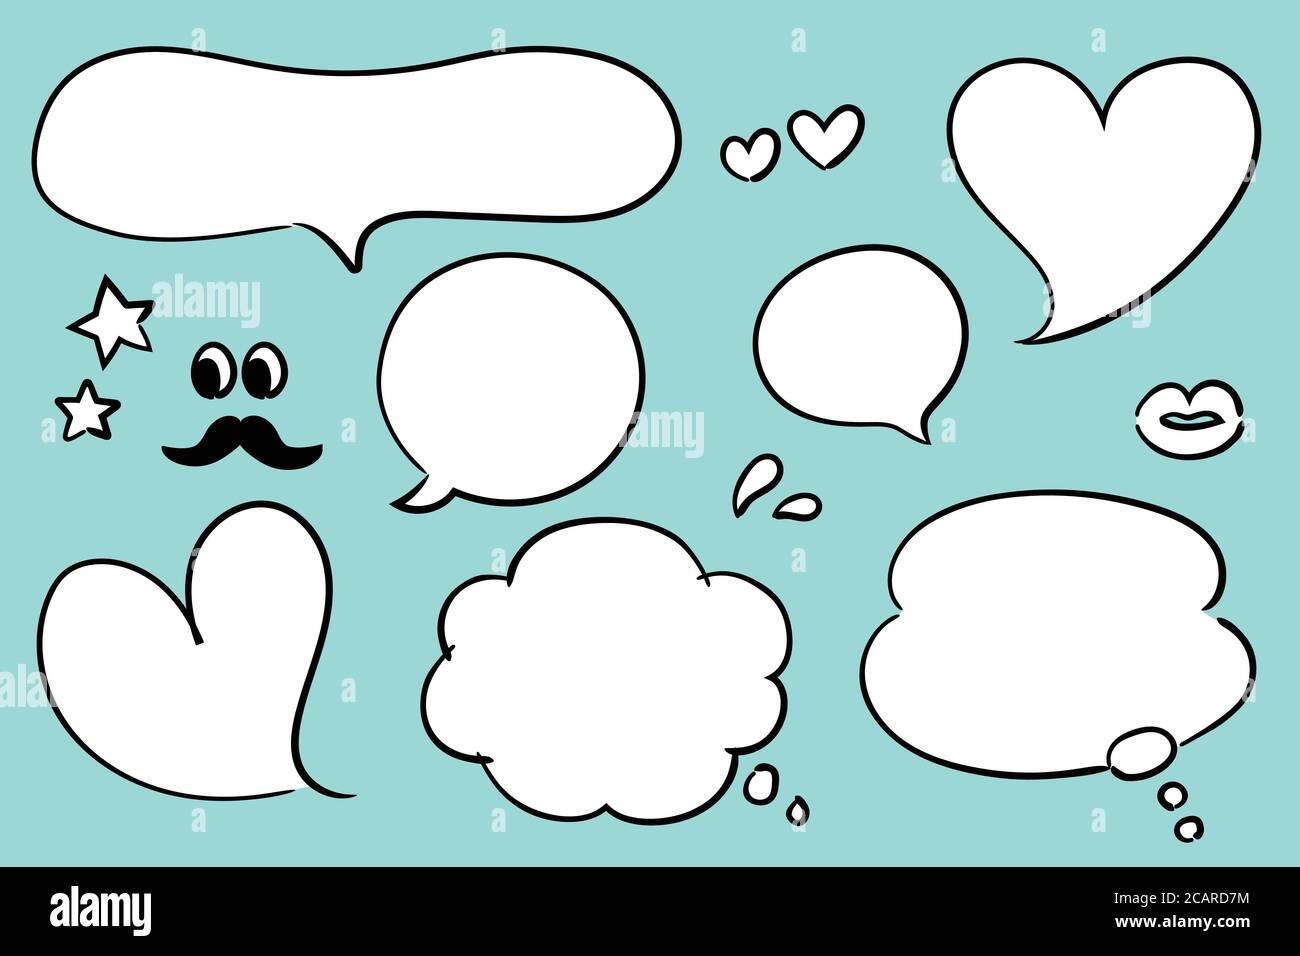 Hand drawn set of speech bubbles. Vector illustration isolated on green background. Stock Vector